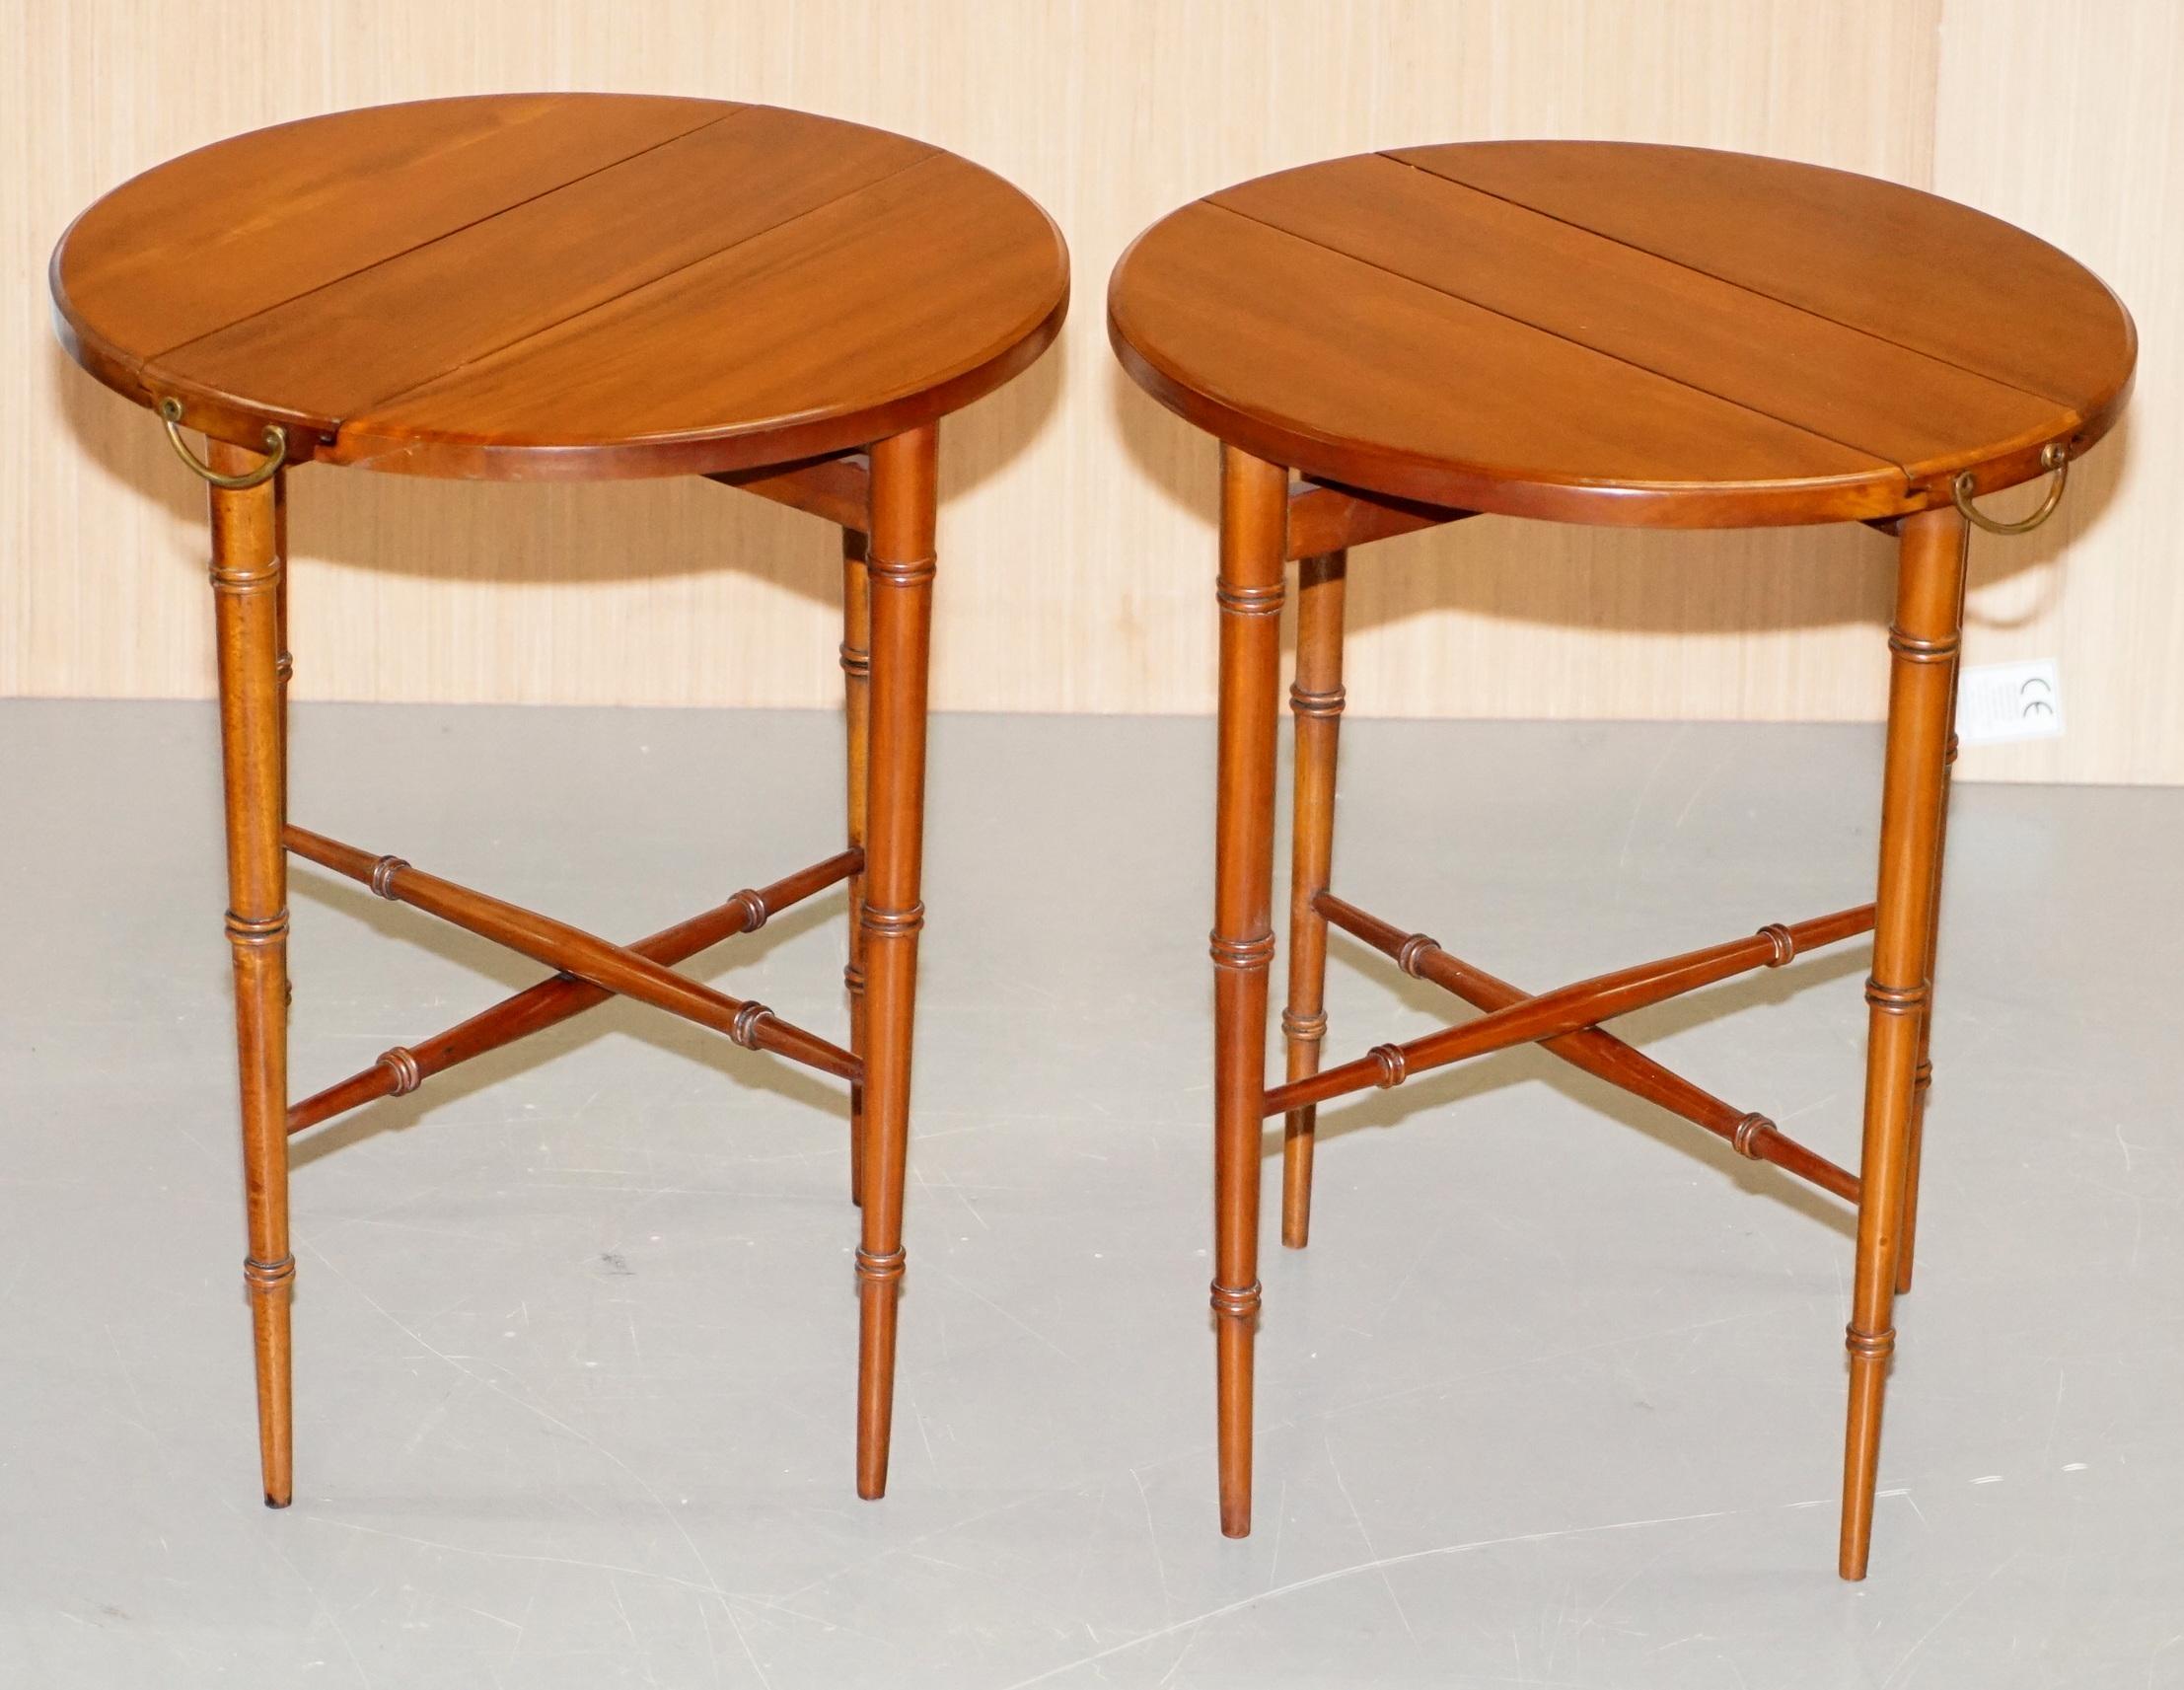 Rare Pair of Military Campaign Side Tables with Two Folded Round Tables Nested 7